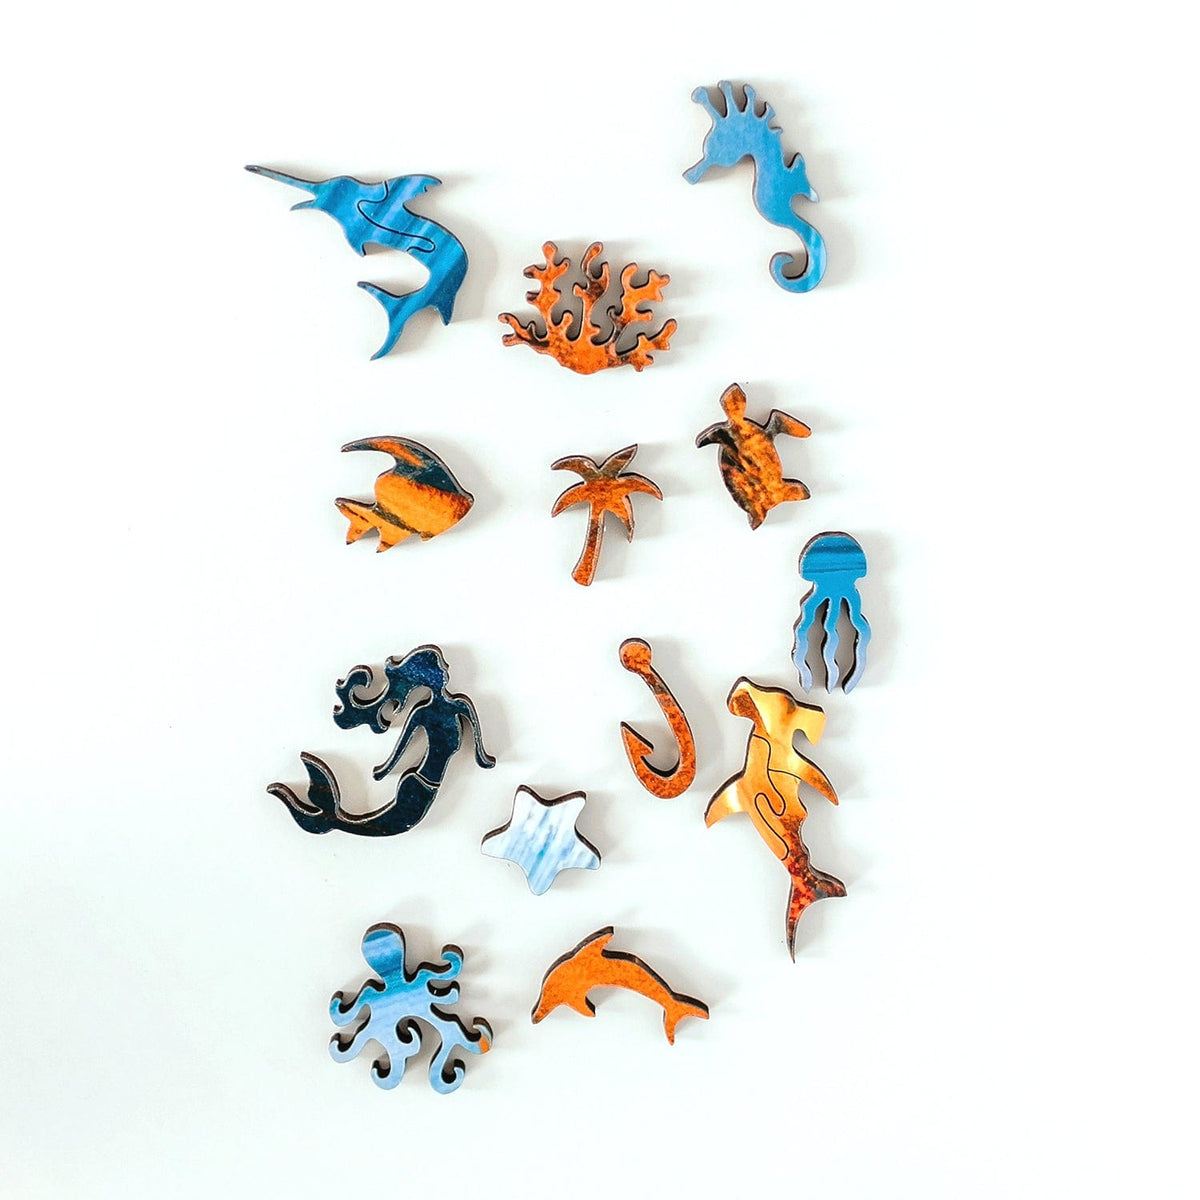 Wooden jigsaw puzzle hand-made character pieces